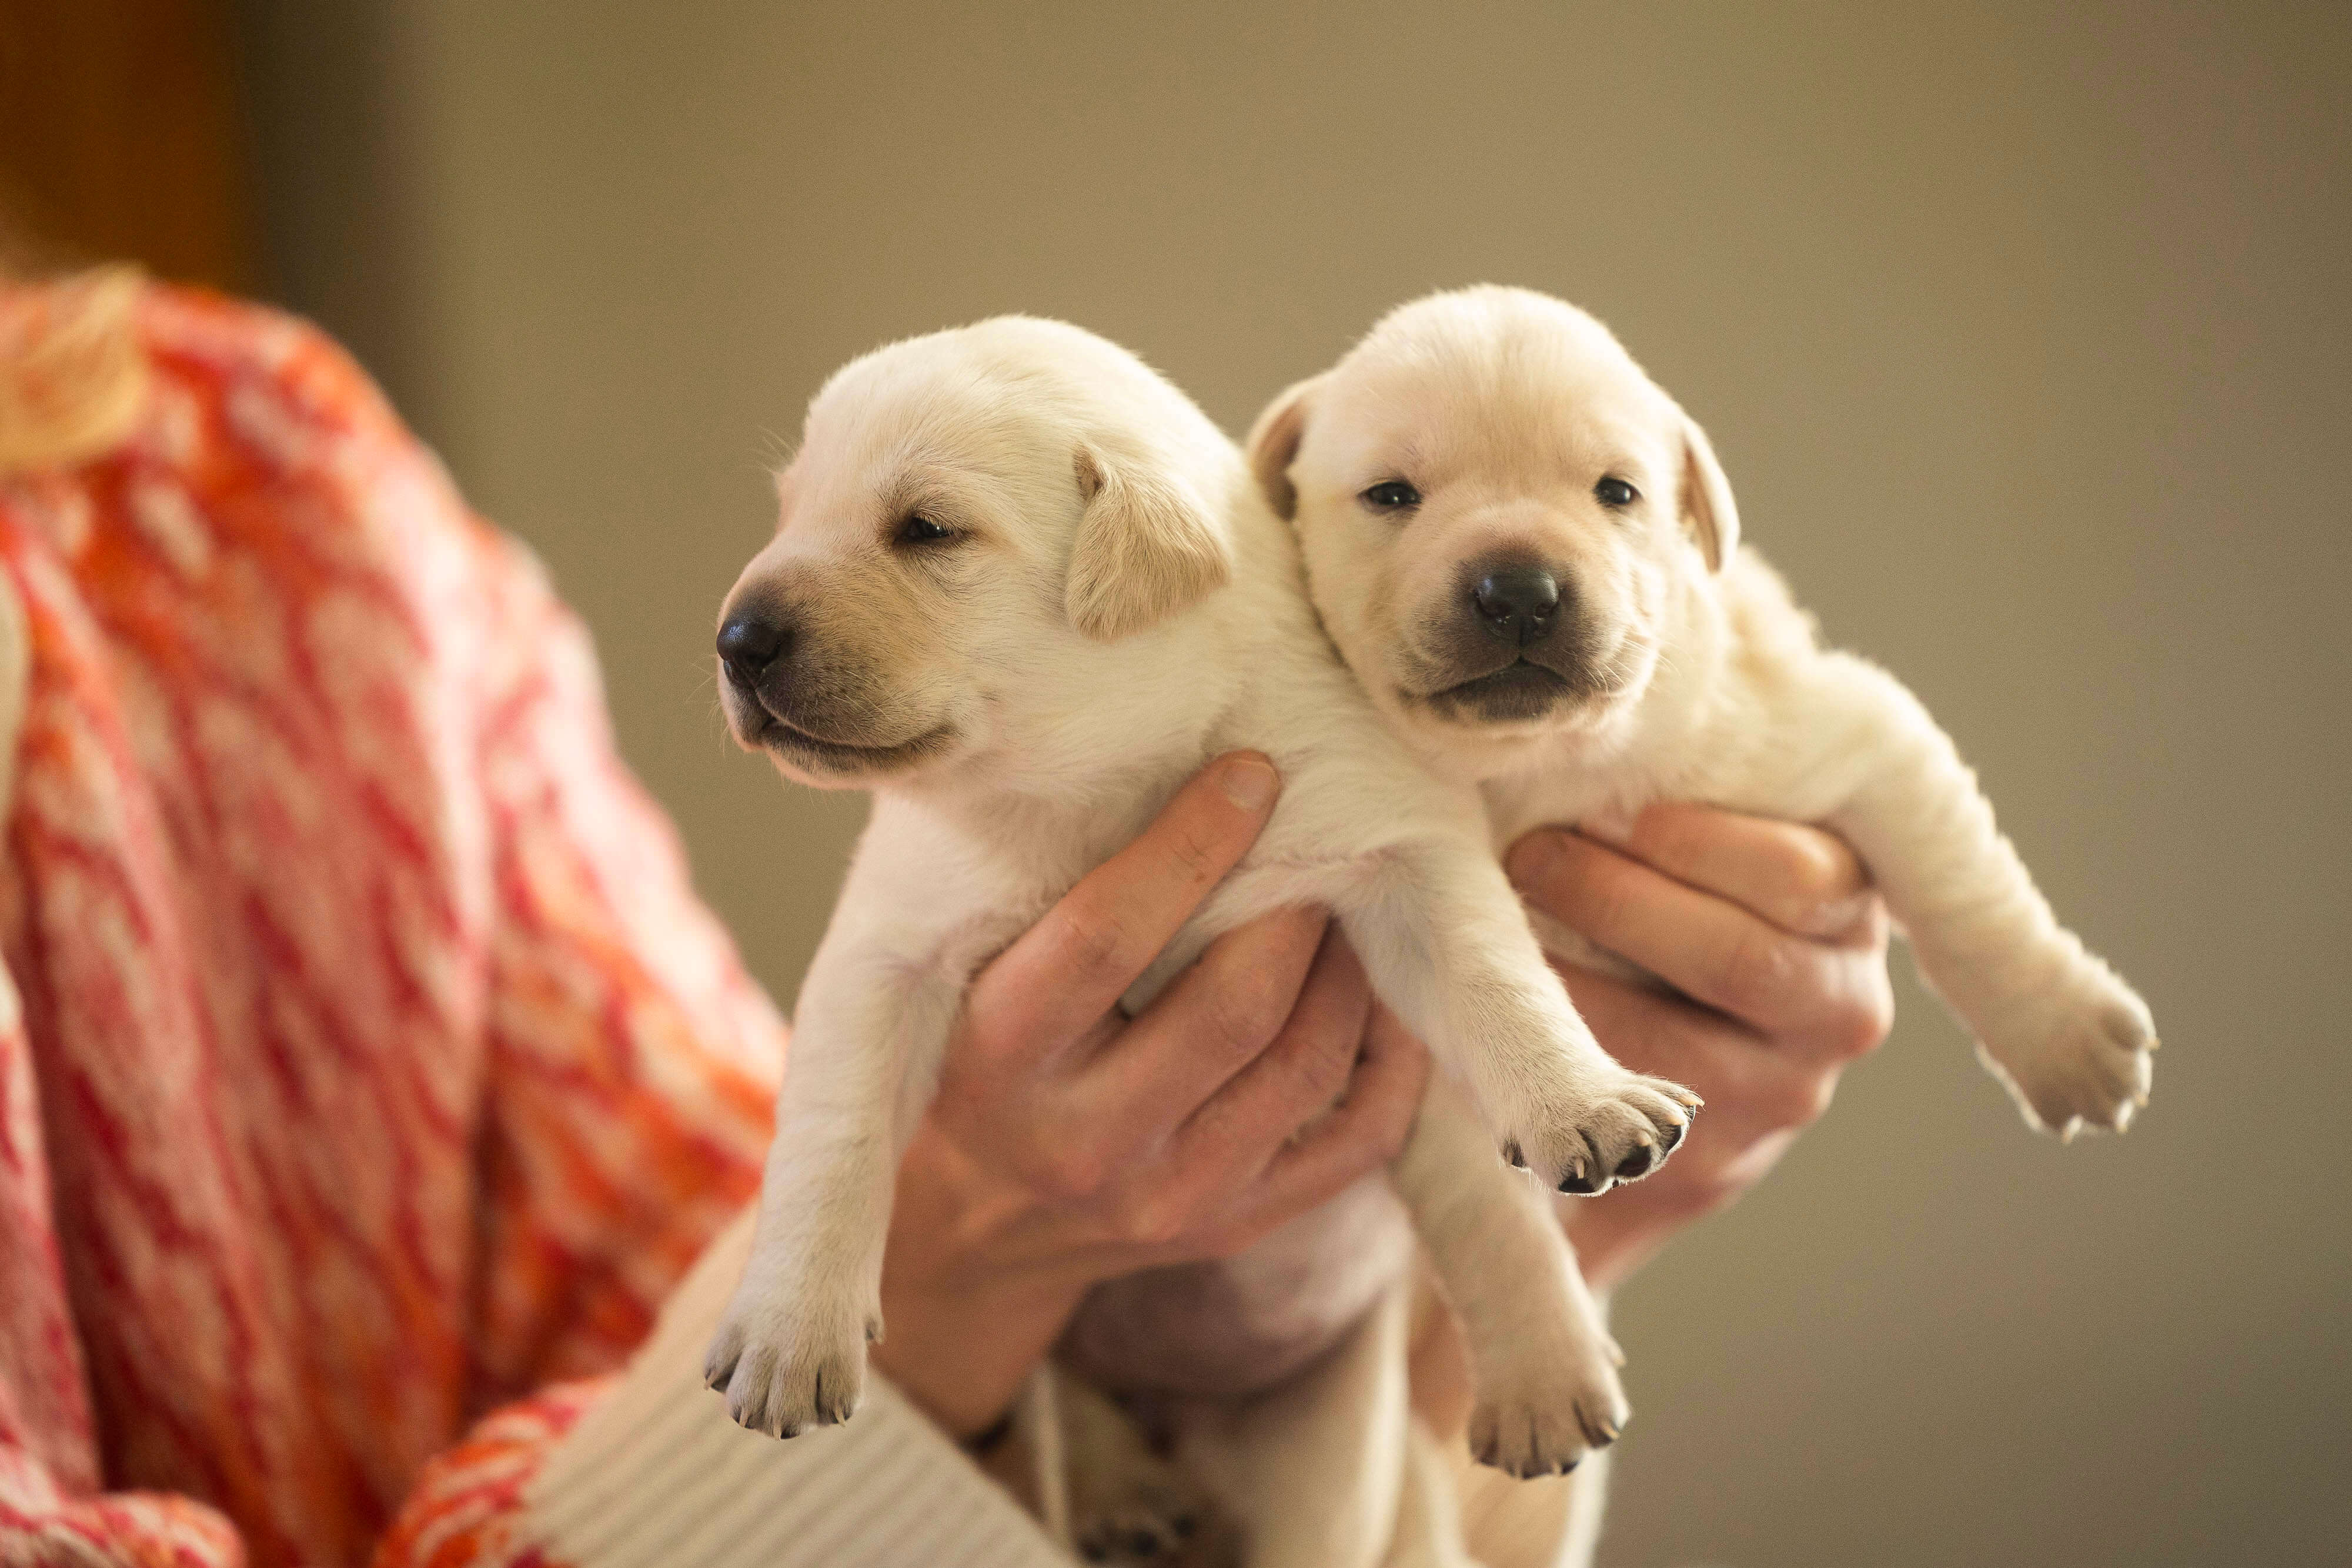 A pair of three-week-old yellow Labrador puppies are held up by woman in orange jumper